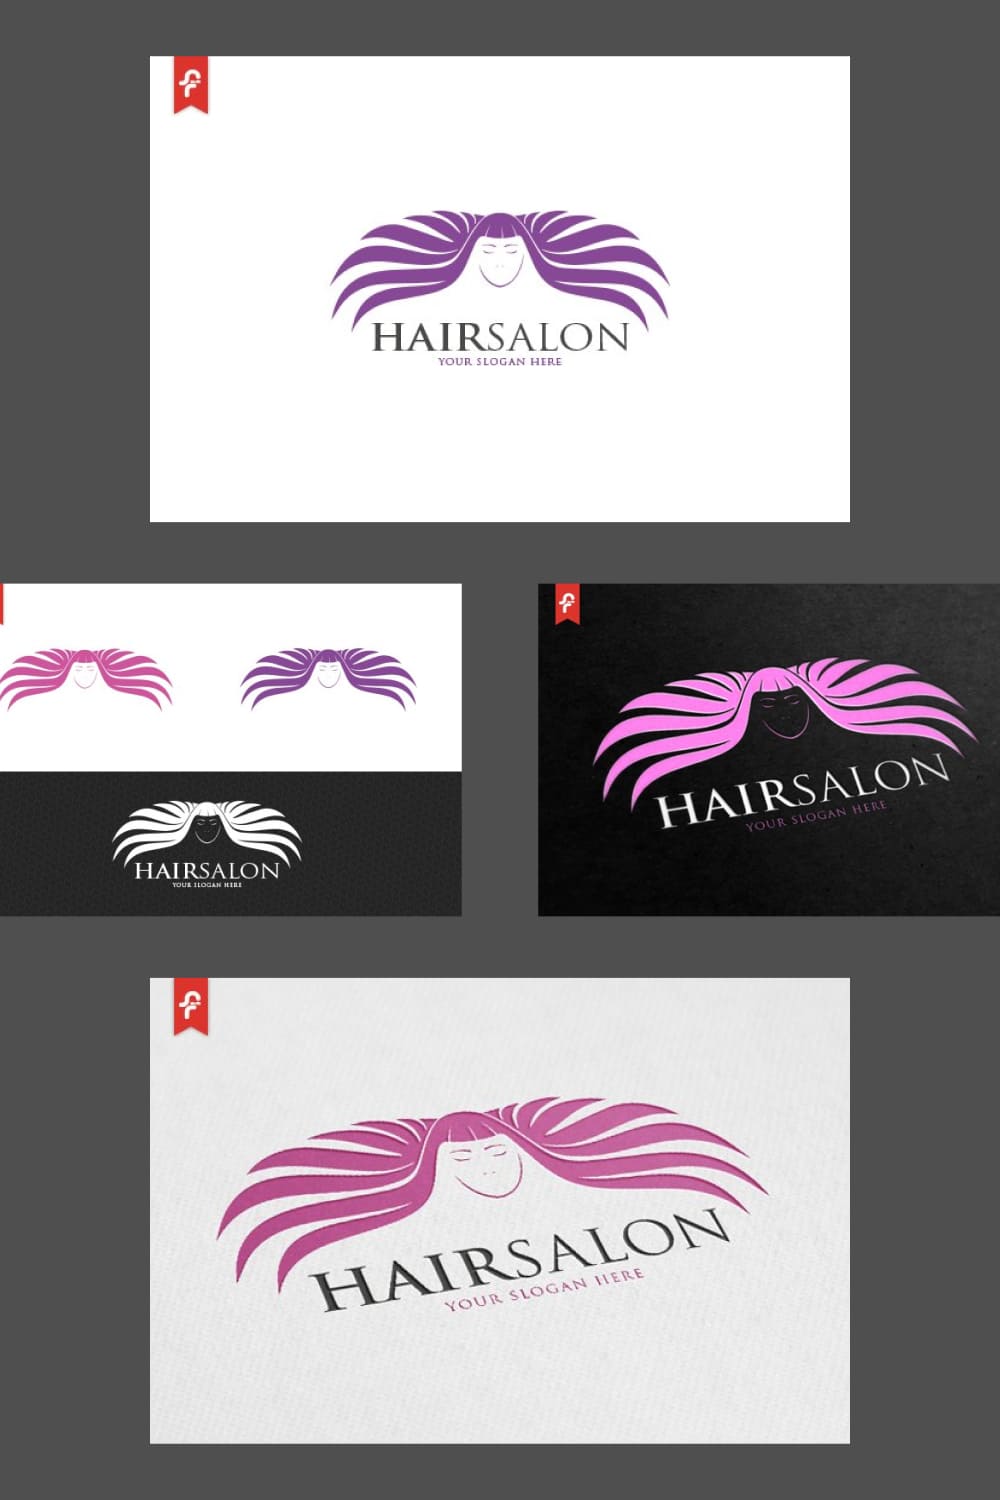 Use this template for your hair salon.